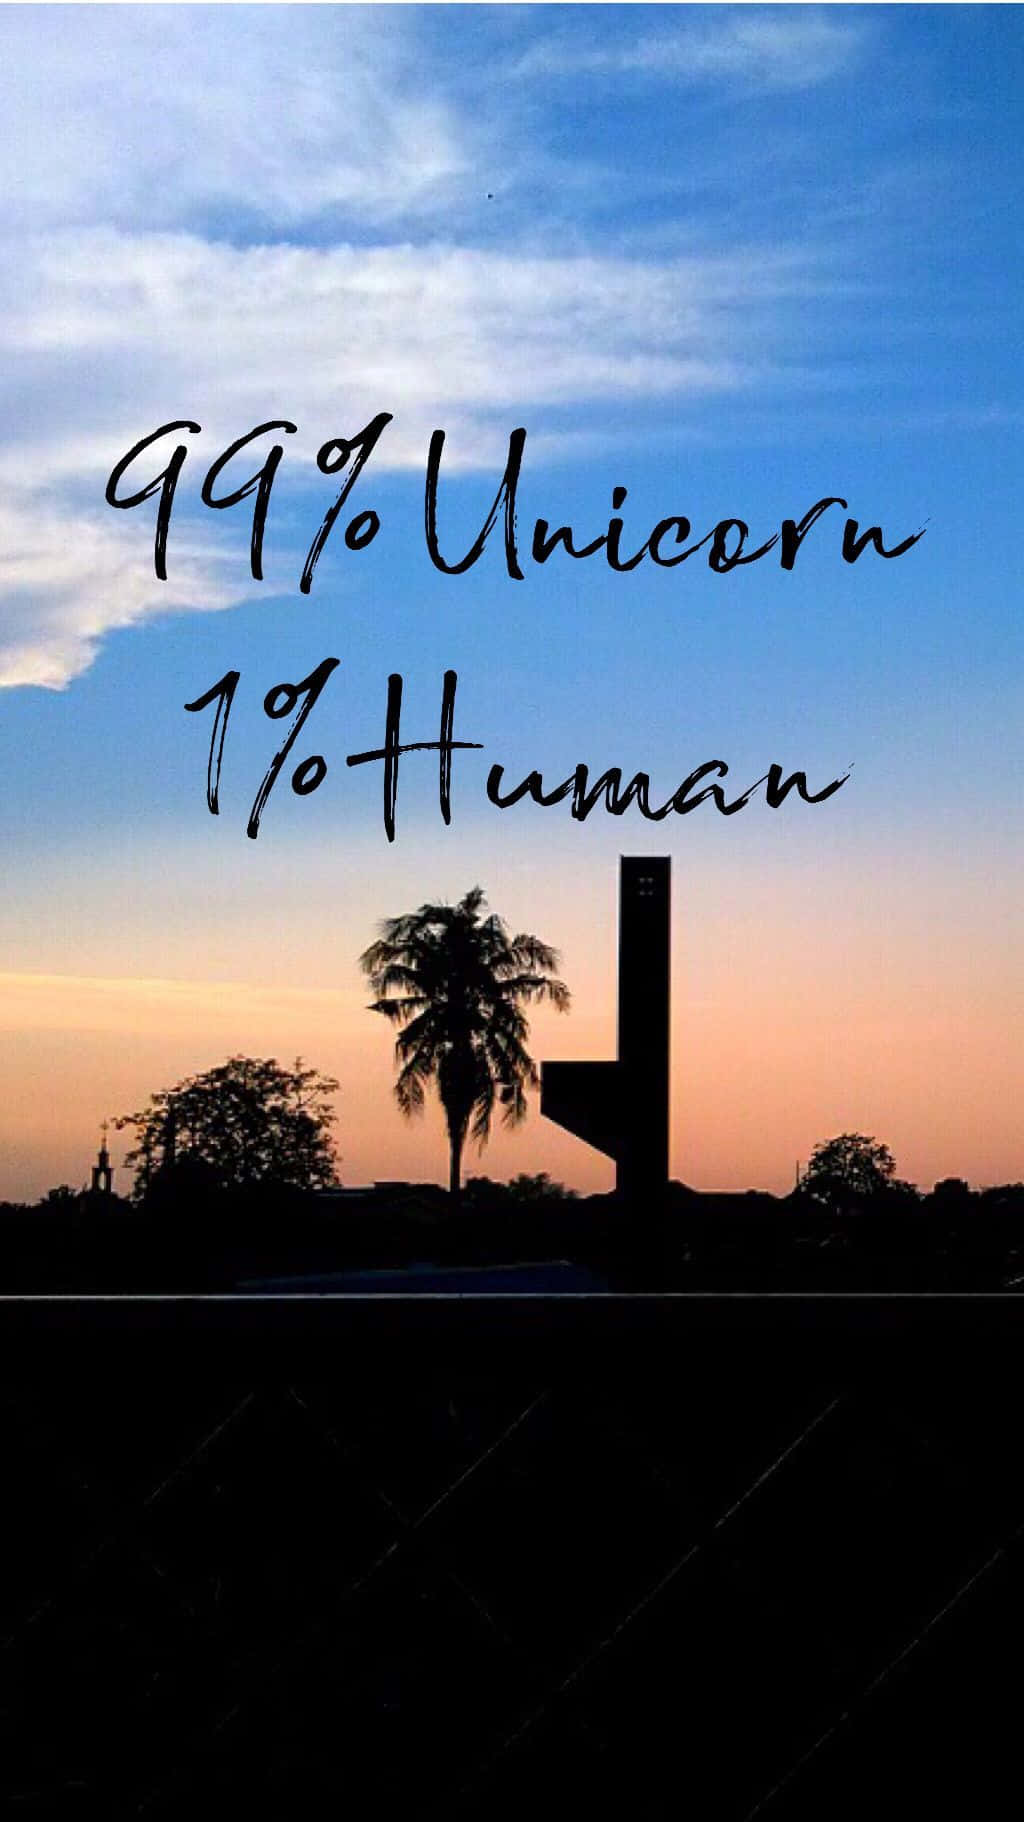 A Sunset With The Words 99% Unicorn 1% Human Wallpaper